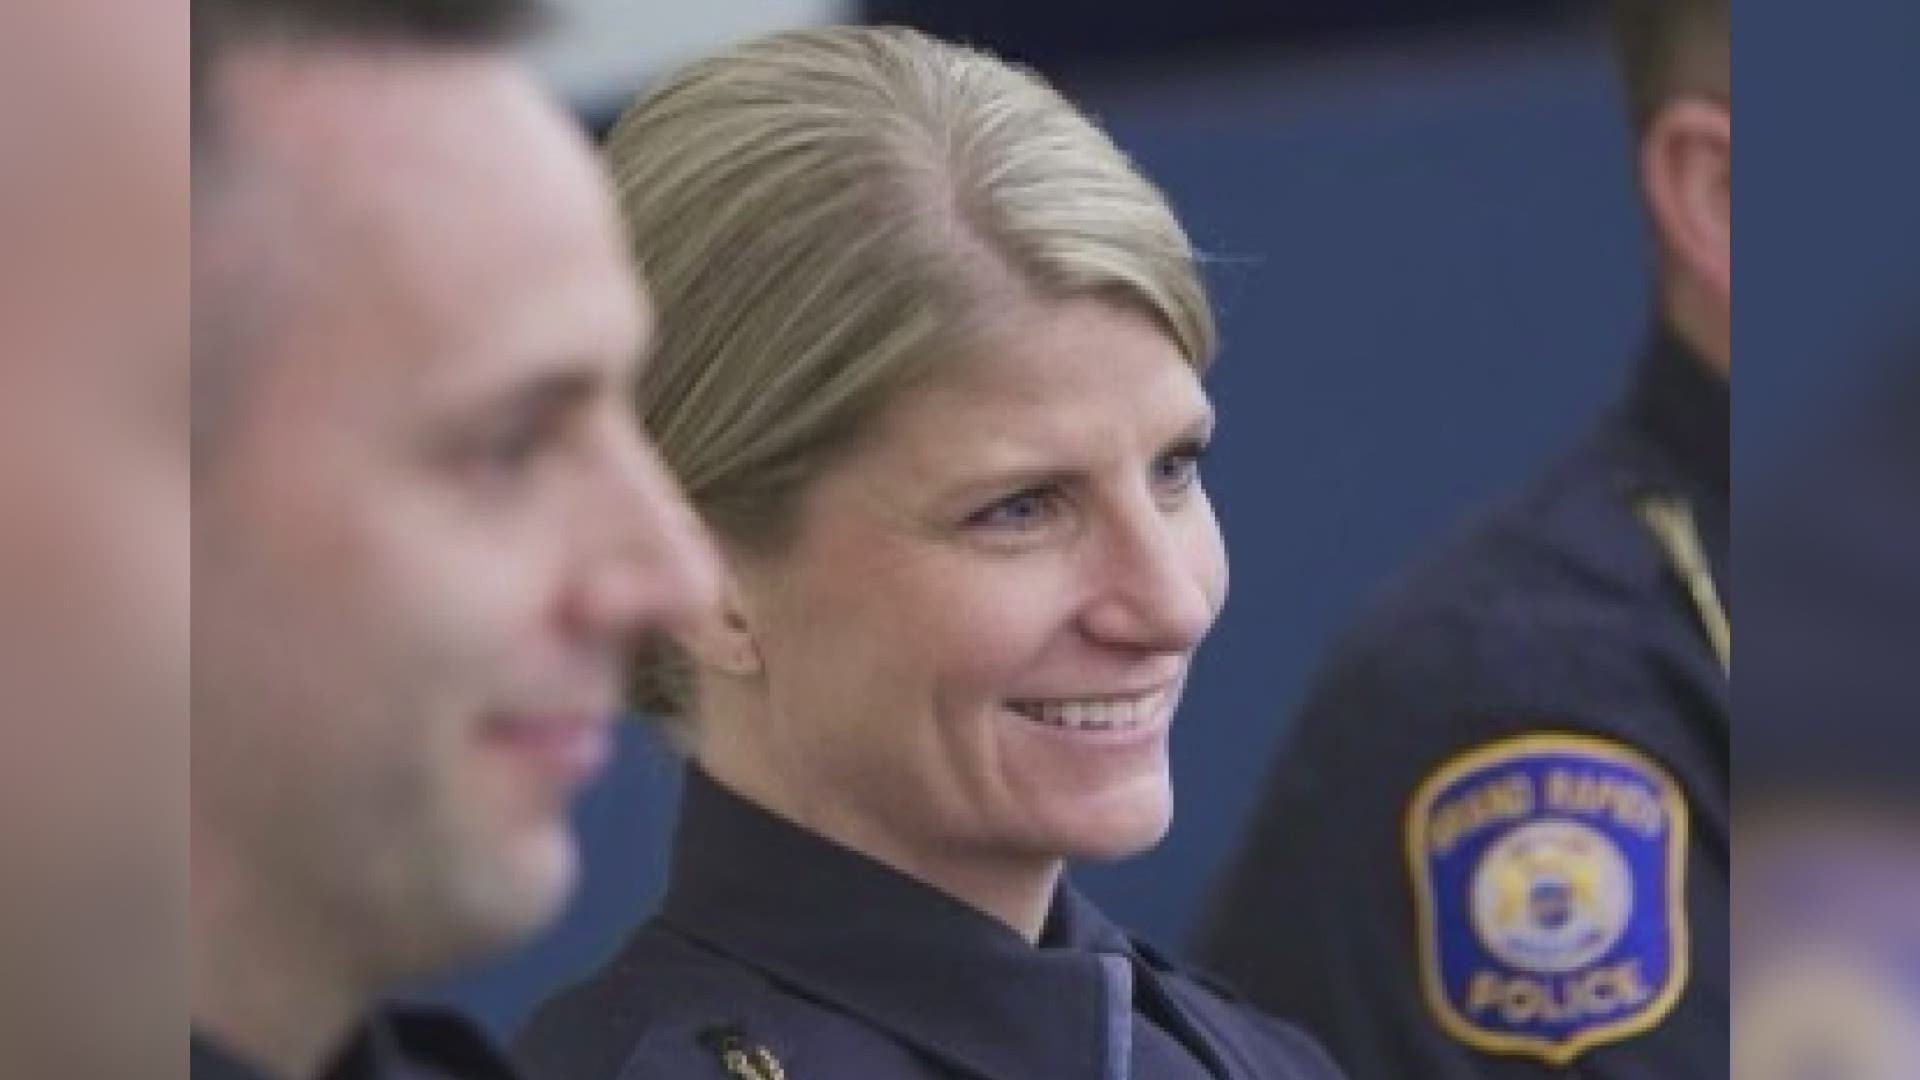 Grand Rapids Police Chief announced Thursday that Captain Kristen Rogers would be promoted Deputy Chief, becoming the first female in the department's history.